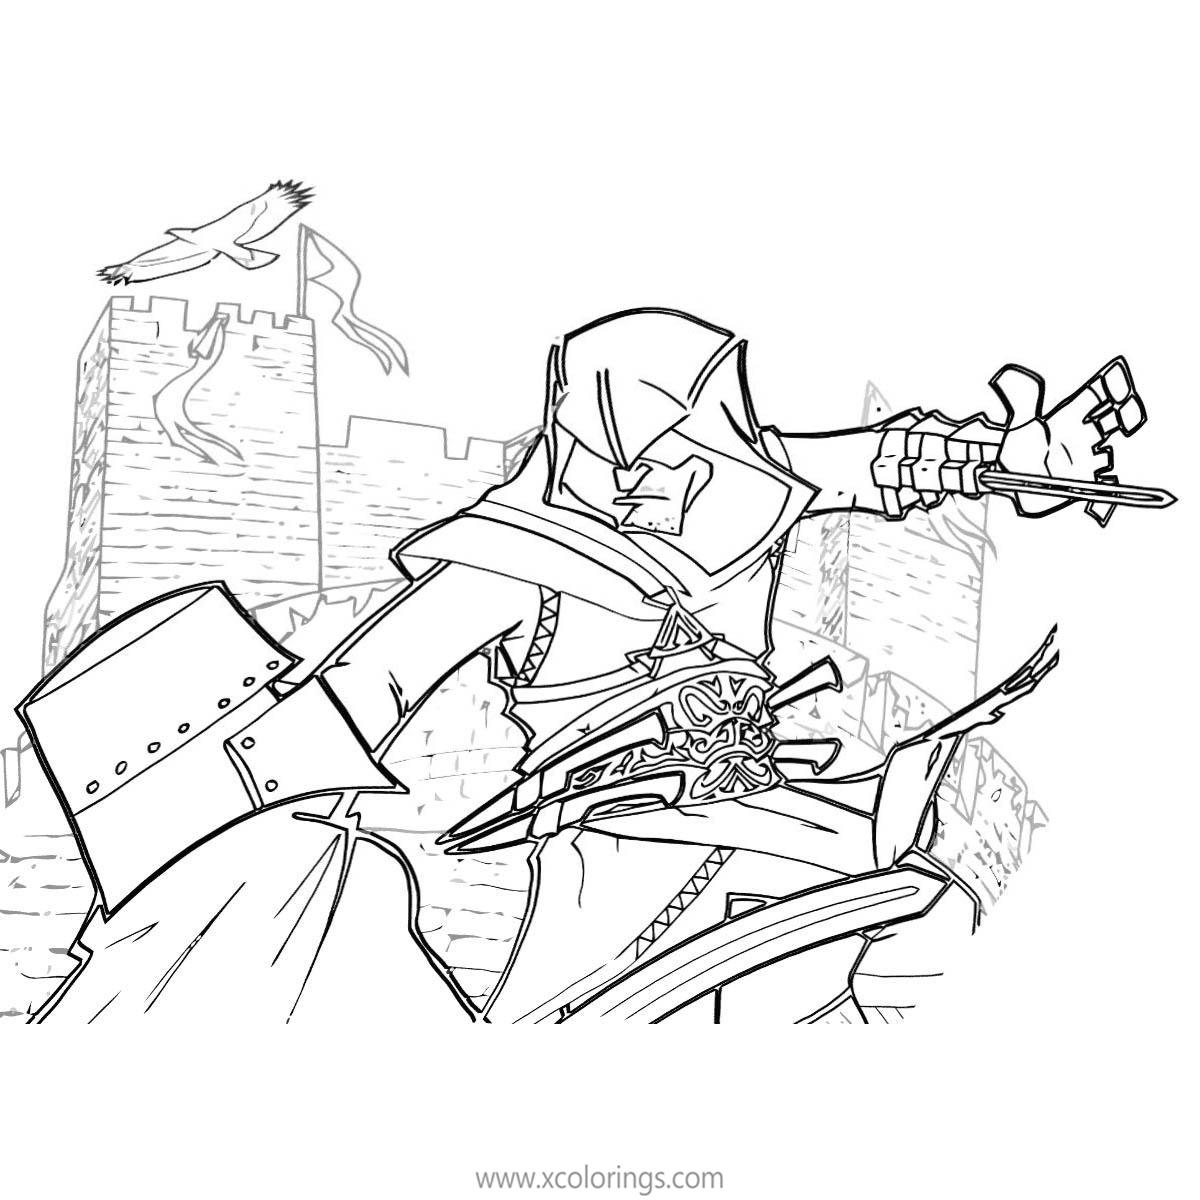 Free Assassin's Creed Lineage Character Coloring Pages printable